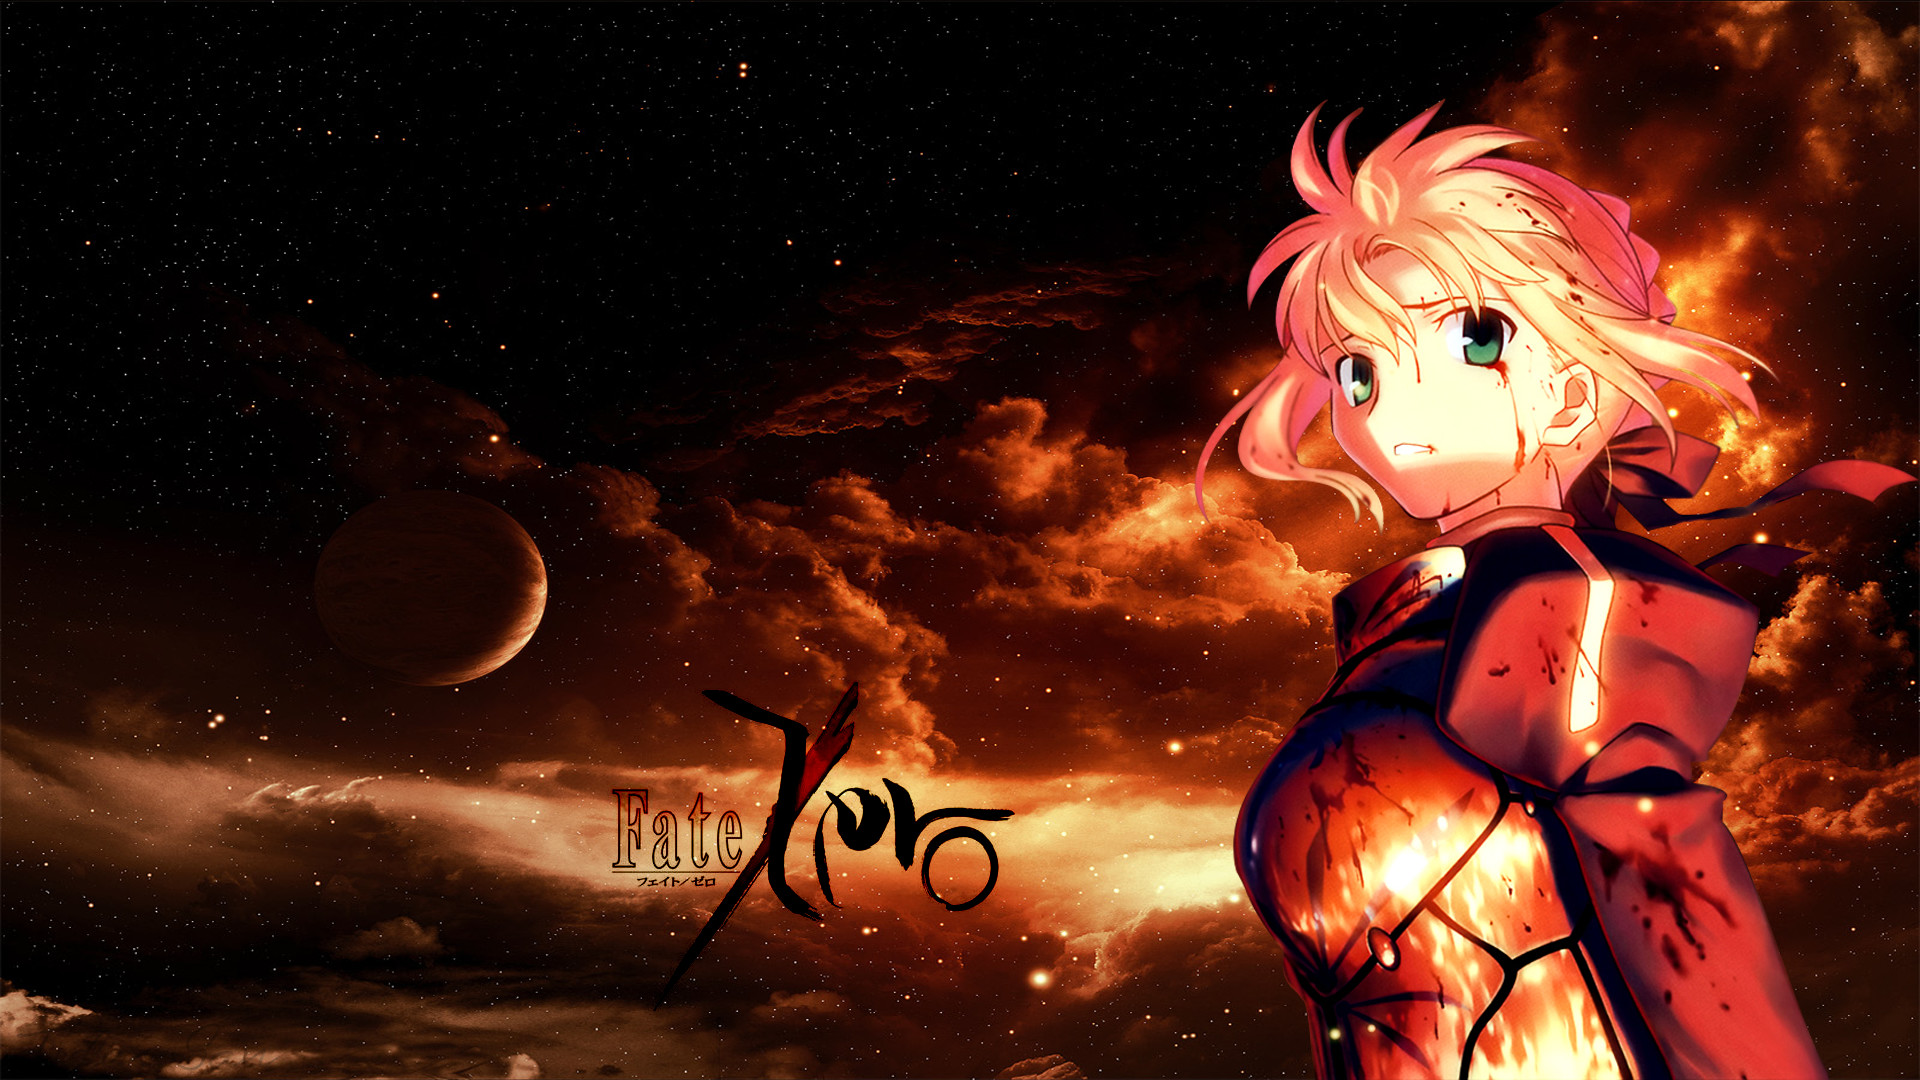 saber from fate zero anime